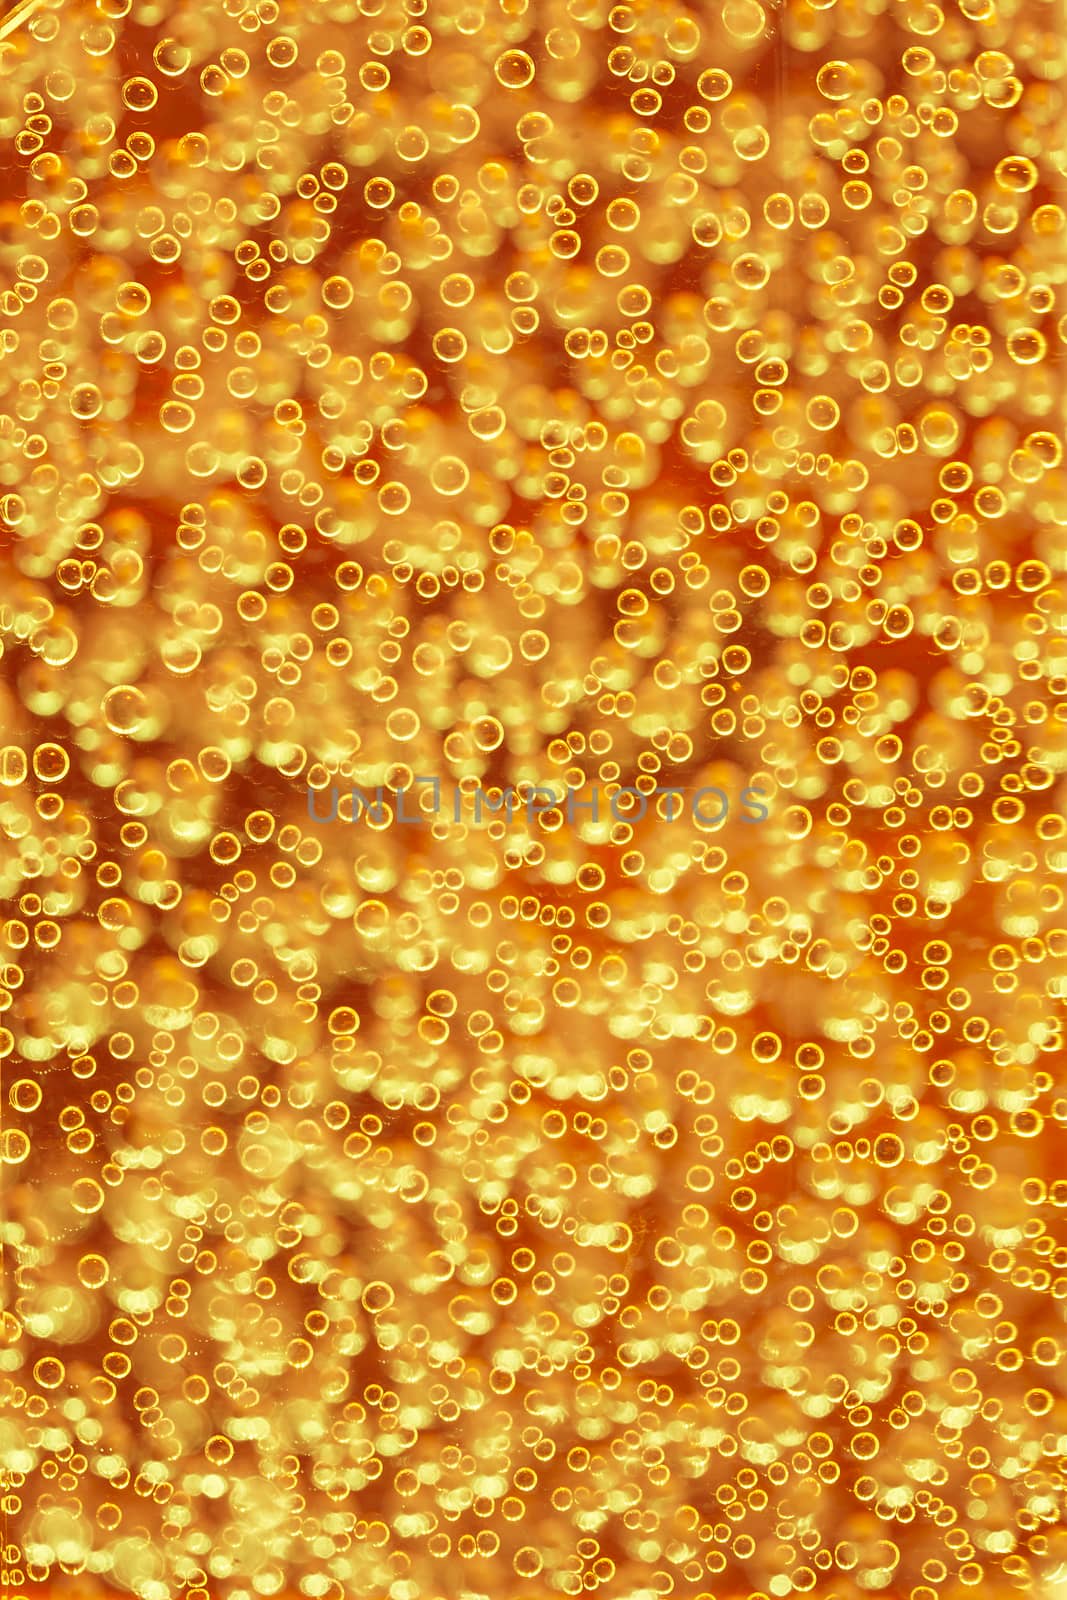 Highly detailed texture of gaseous liquid with sparkling yellow bubbles